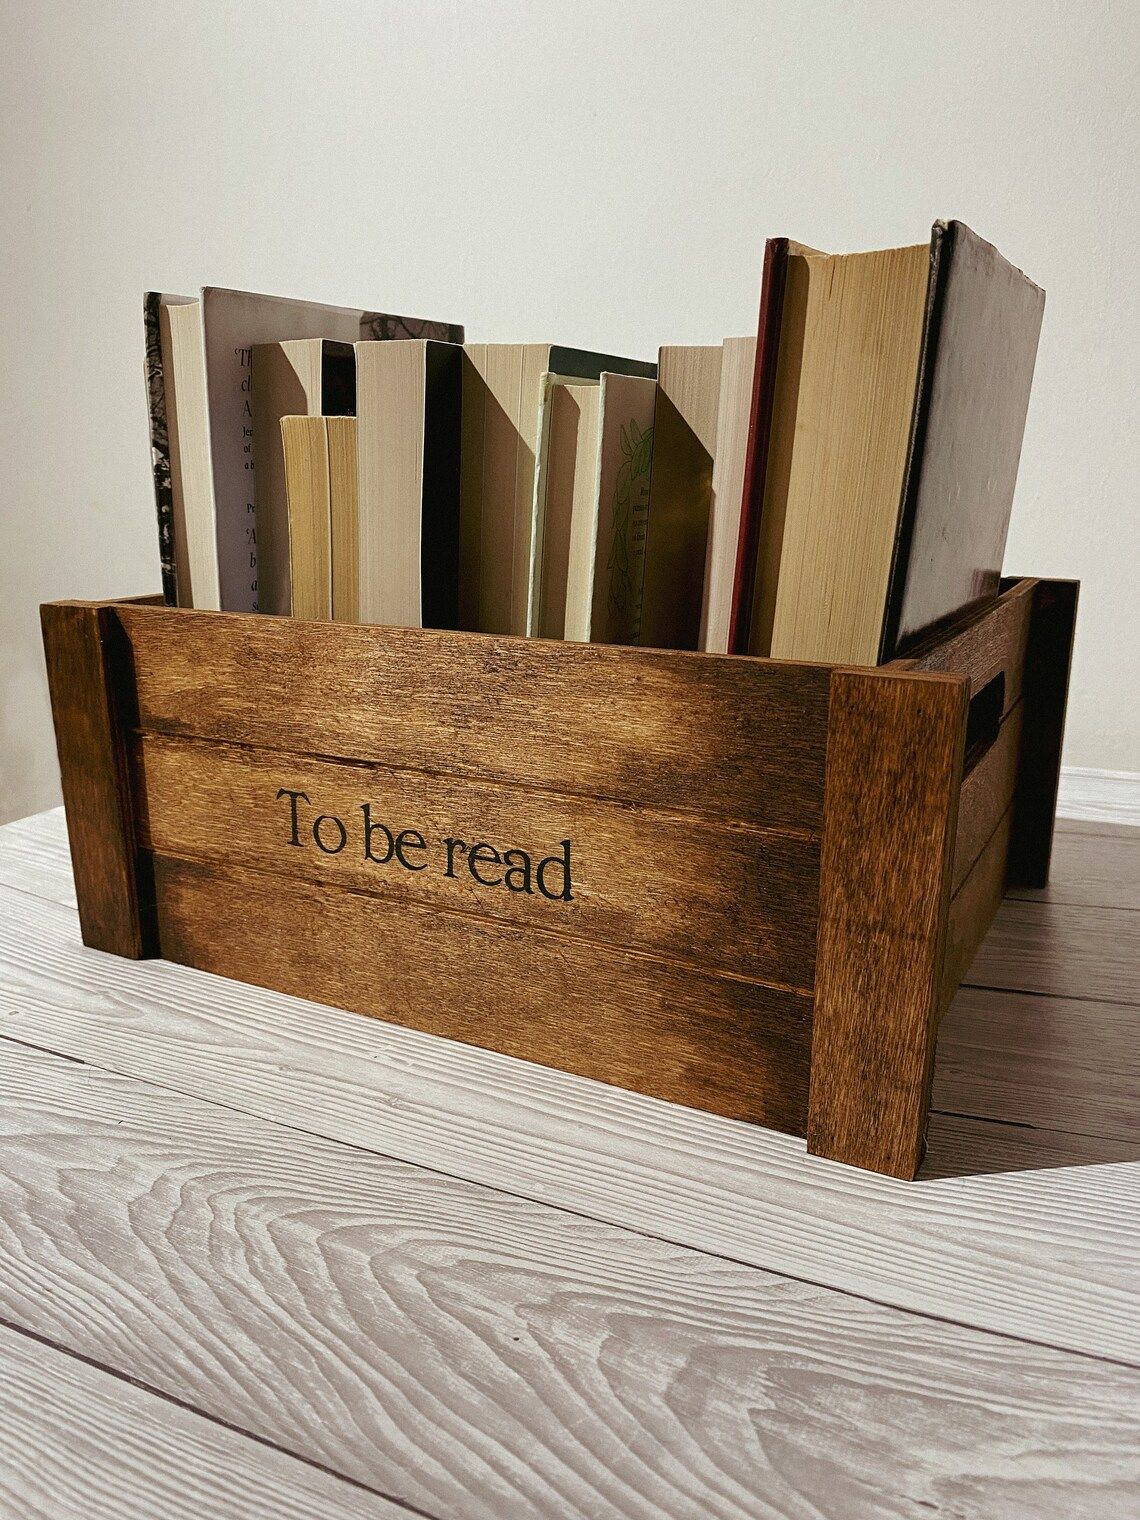 Wood crate containing books with "to be read" stenciled on the side